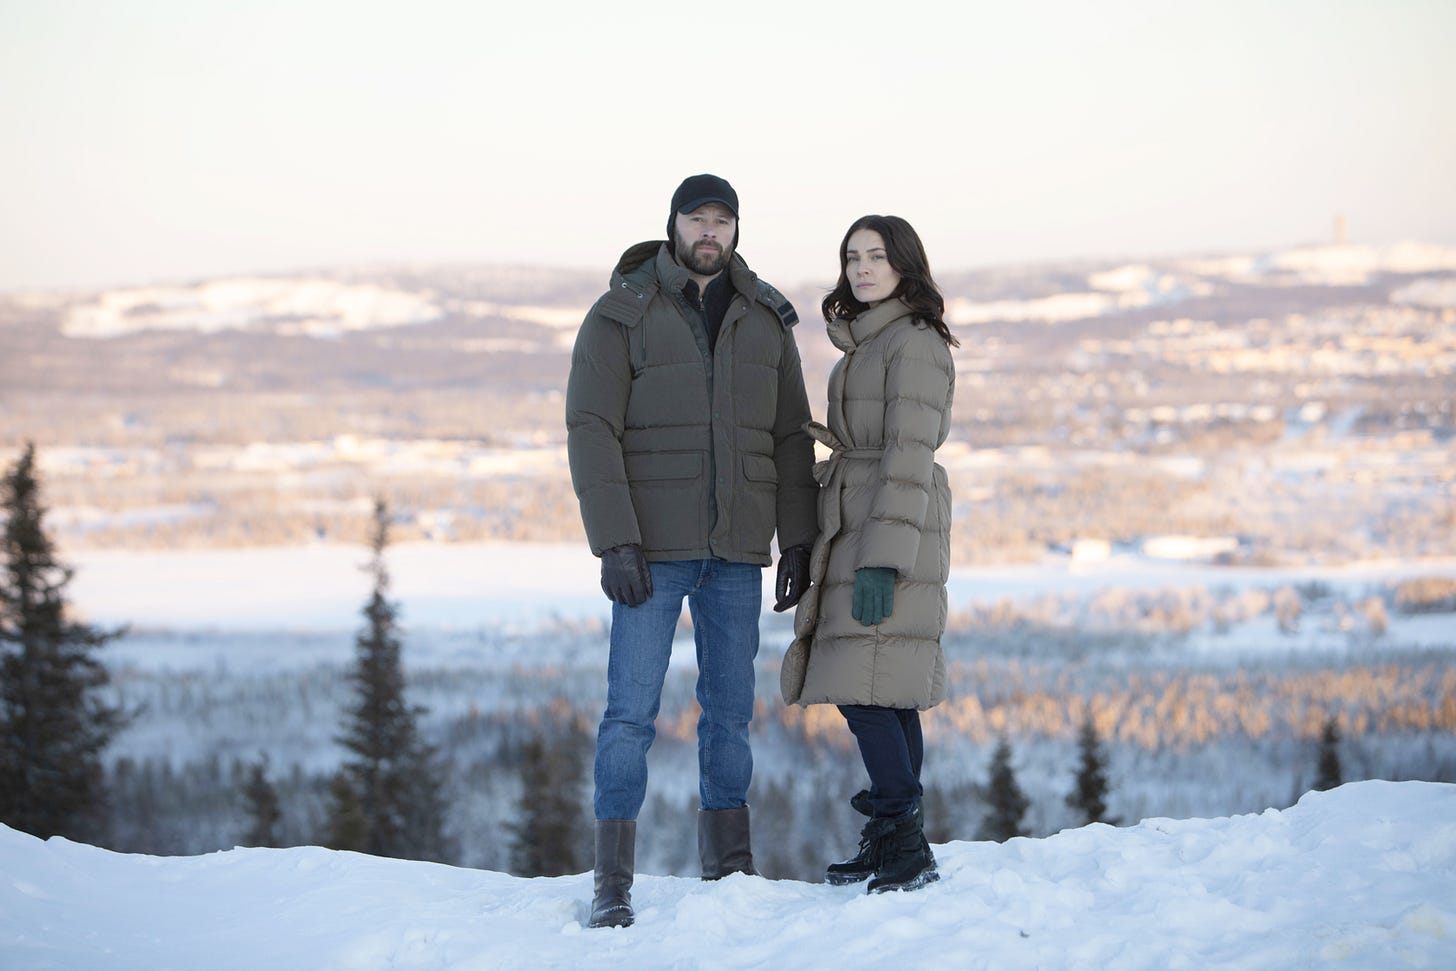 First trailer released for Beartown (Björnstad) – The Killing Times